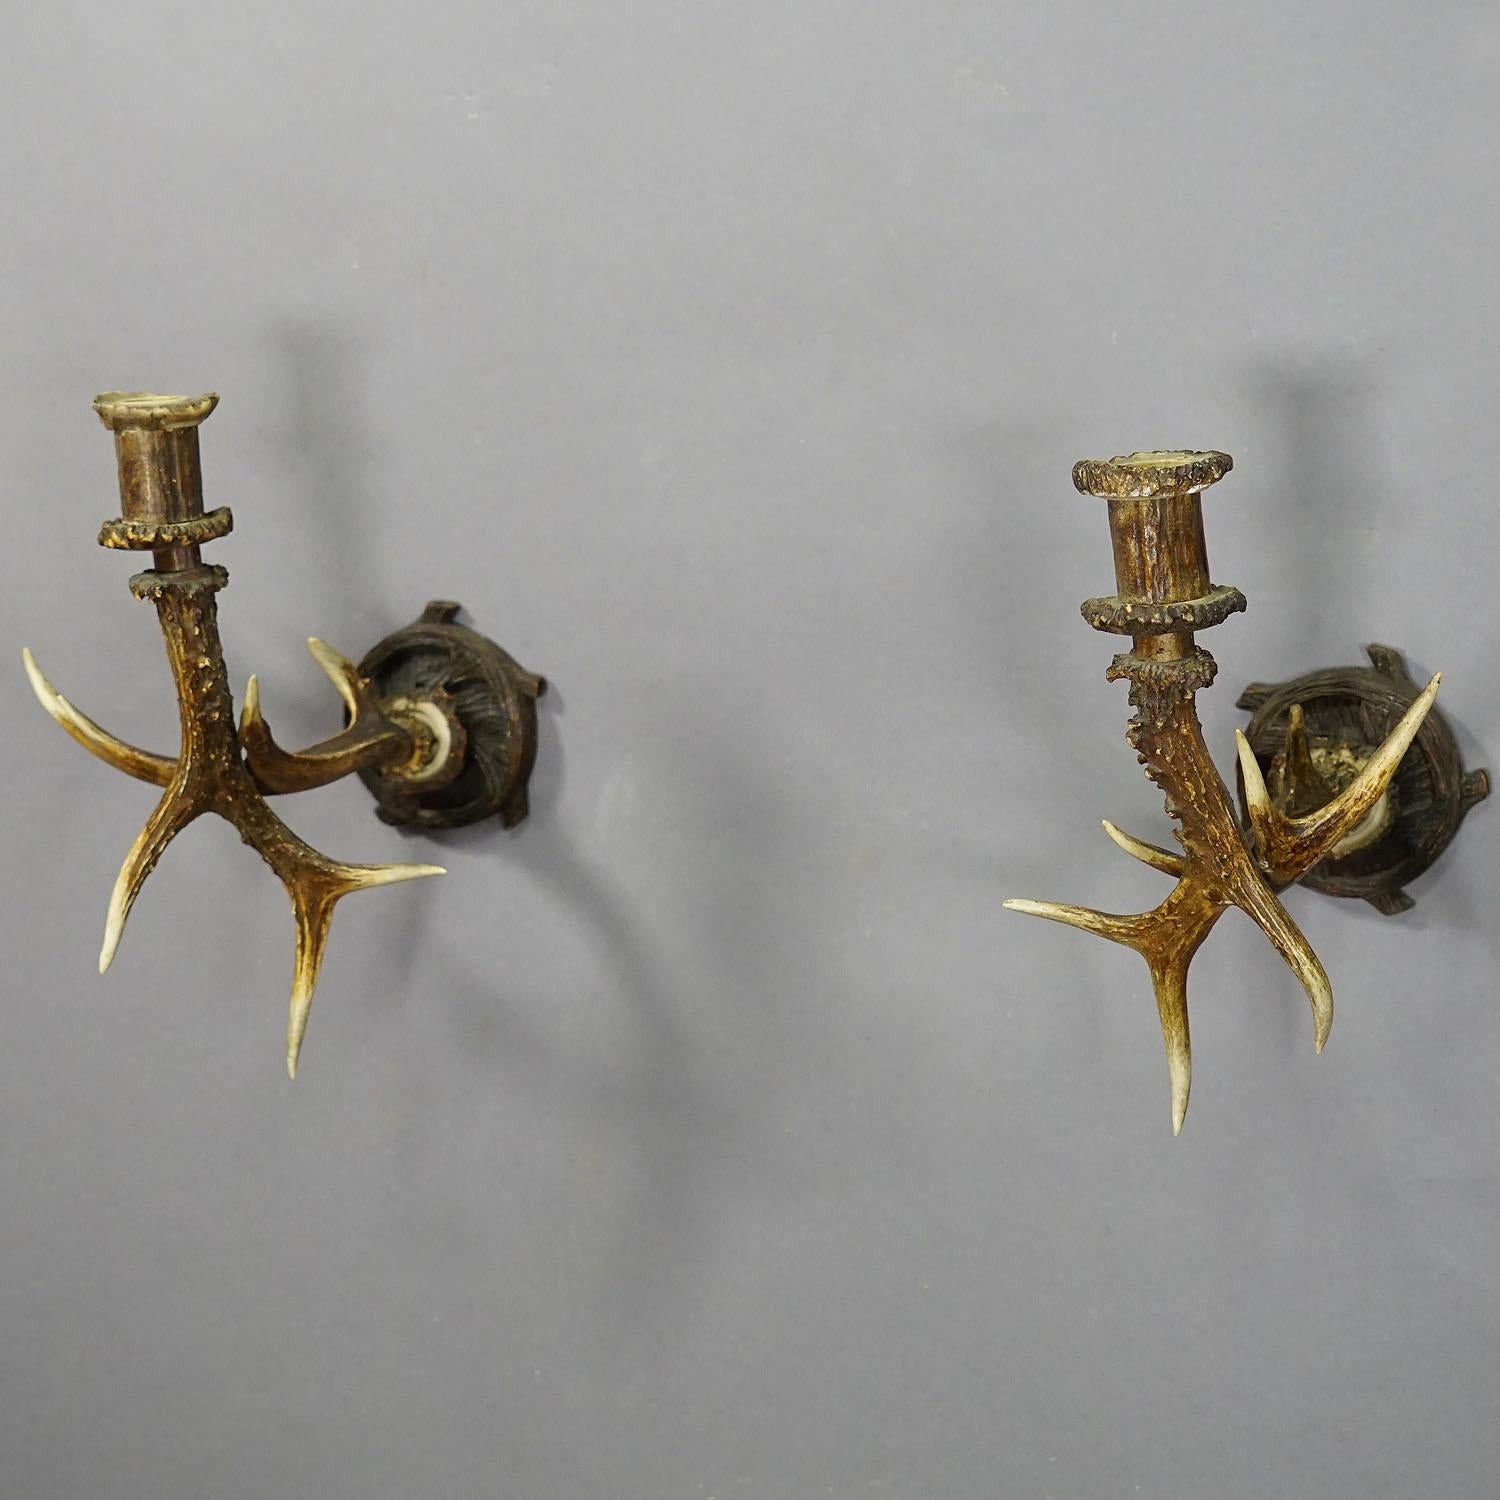 Hand-Crafted Pair Black Forest Candle Sconces with Deer Horns, Germany Ca. 1900